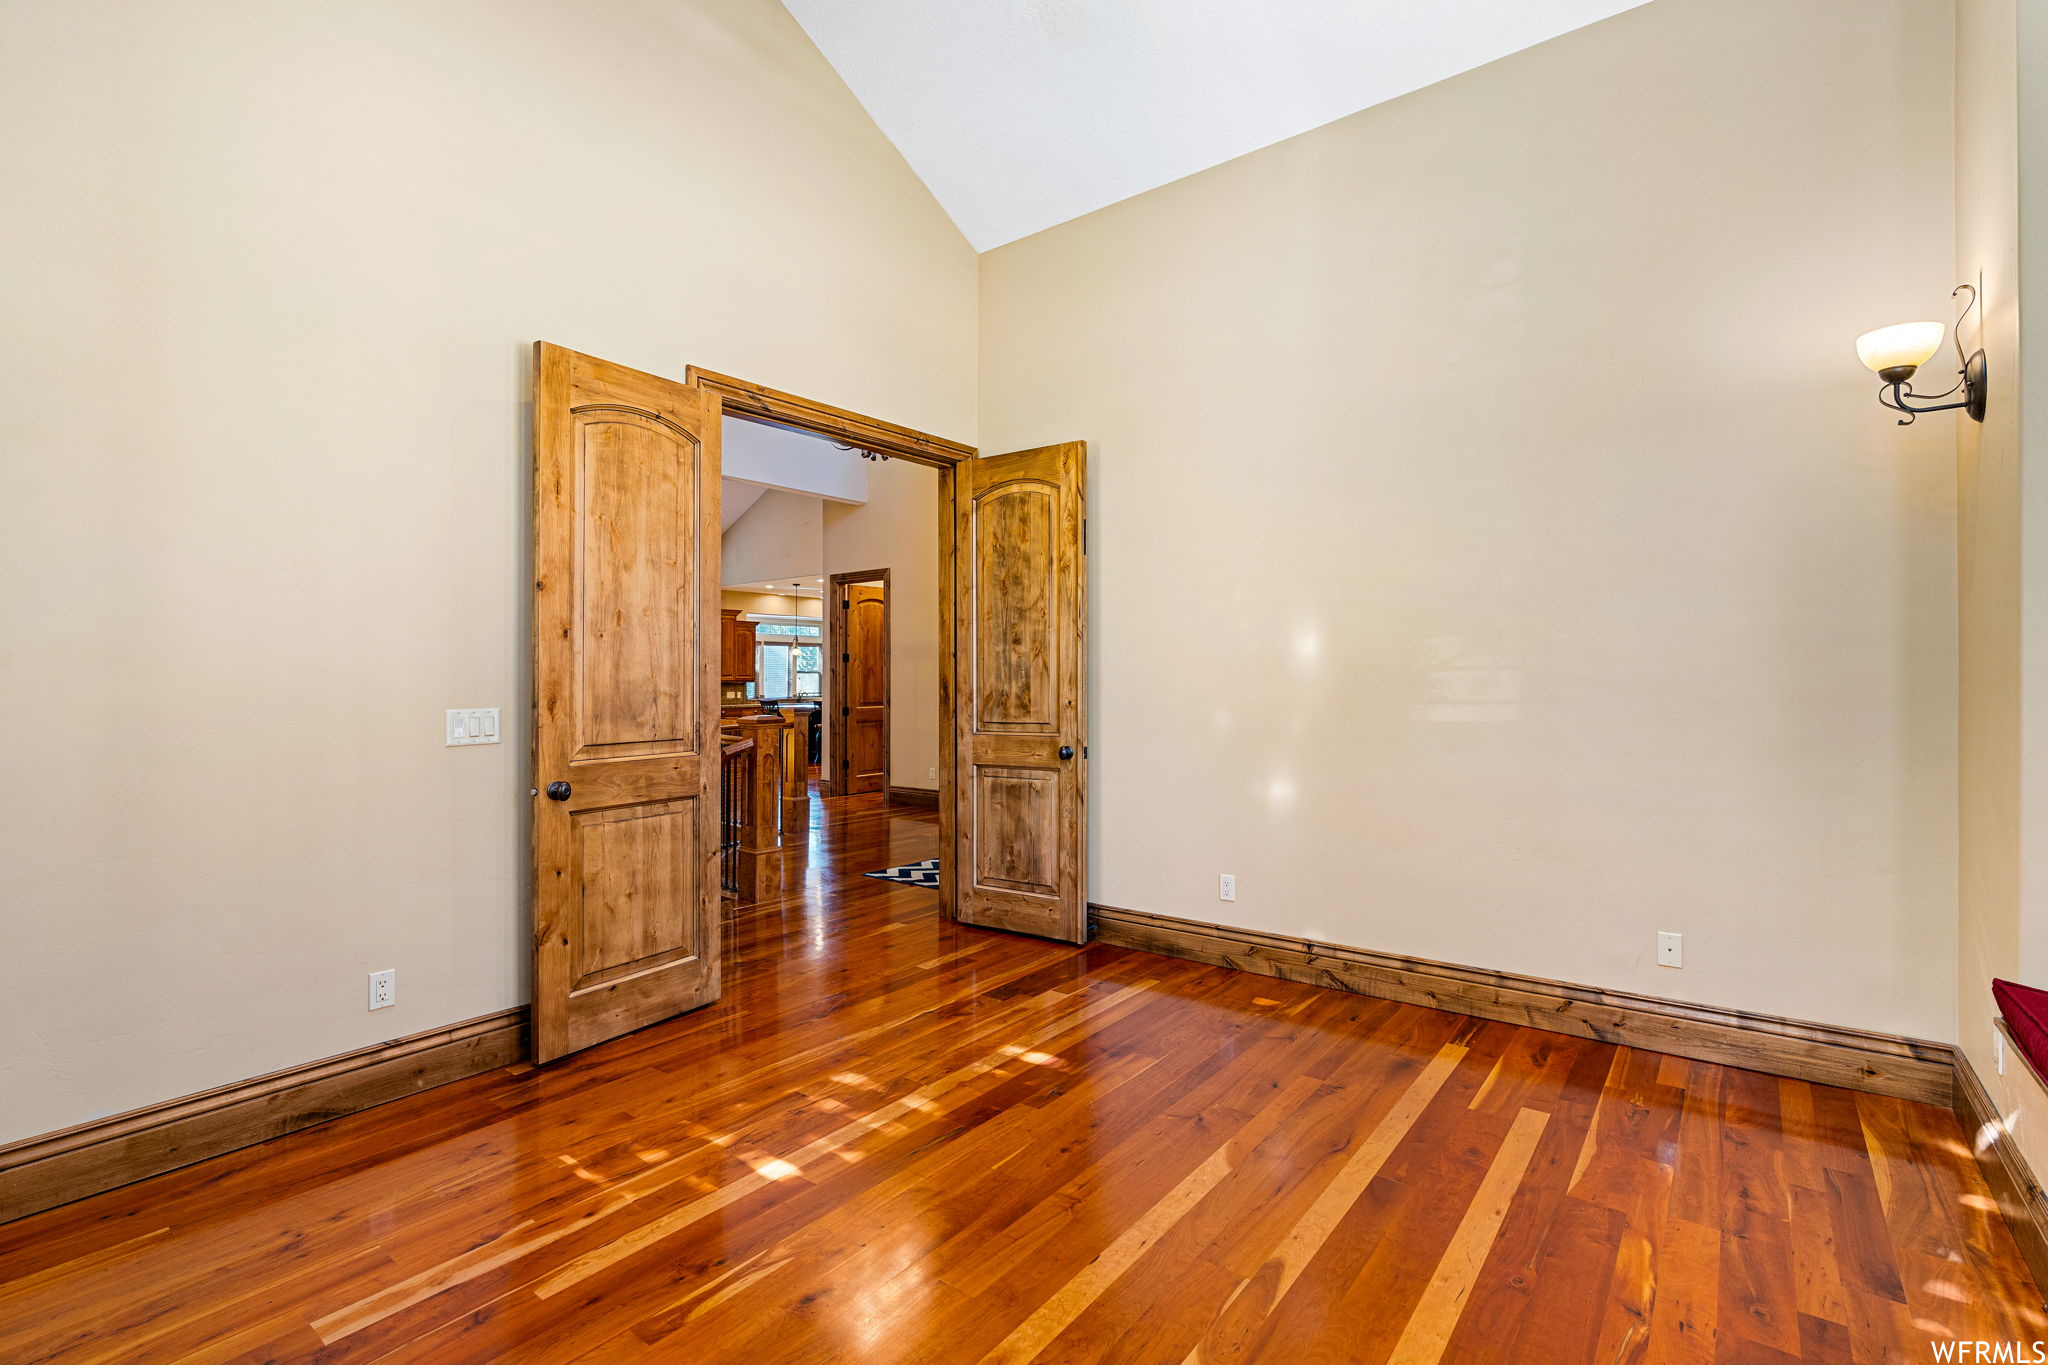 Unfurnished room featuring dark hardwood floors and vaulted ceiling high